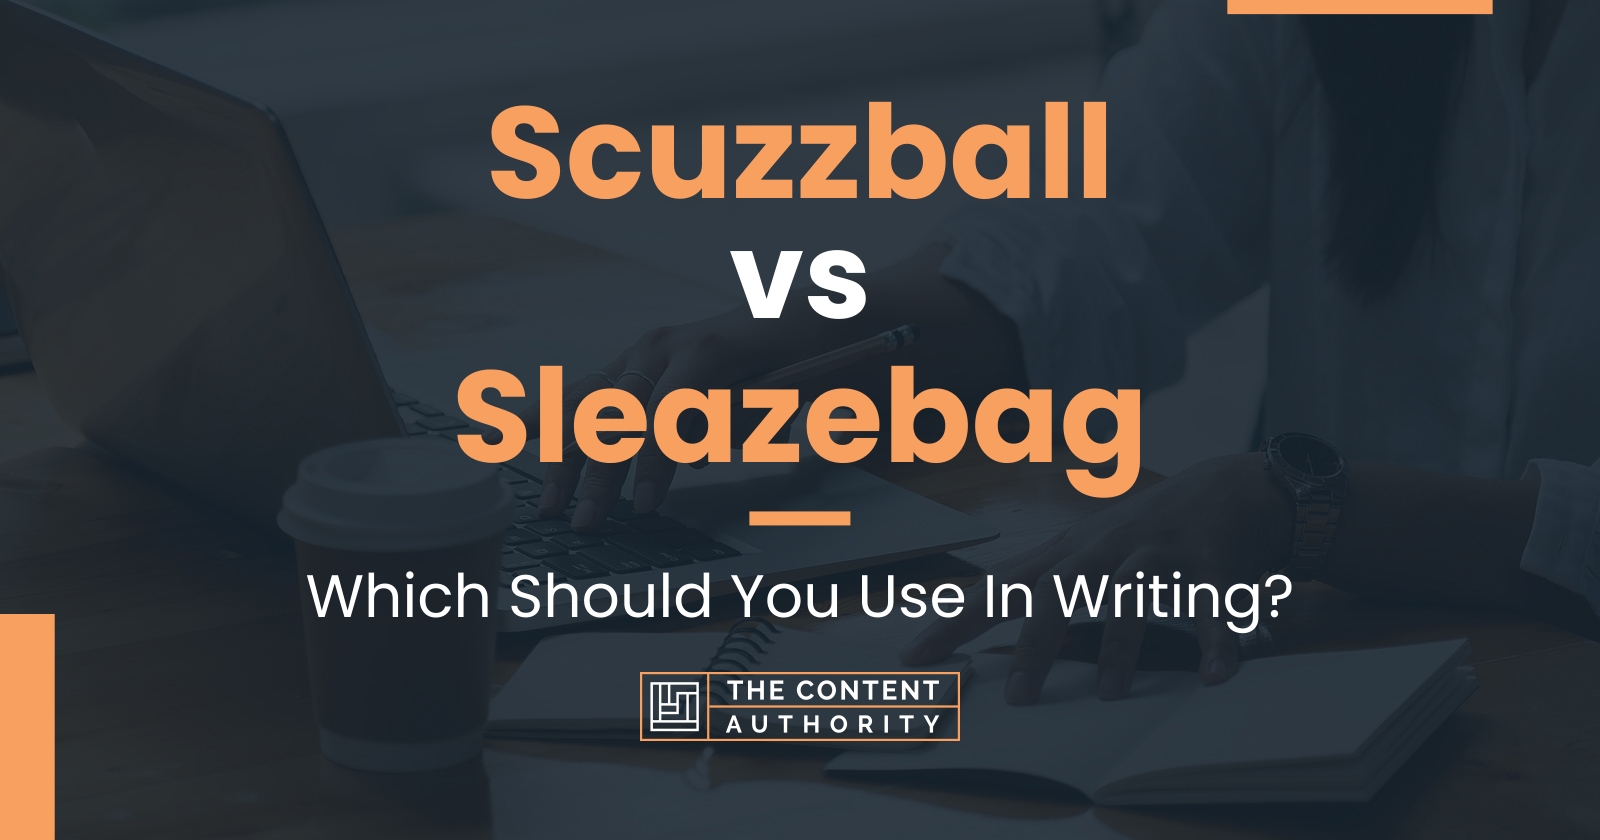 Scuzzball vs Sleazebag: Which Should You Use In Writing?